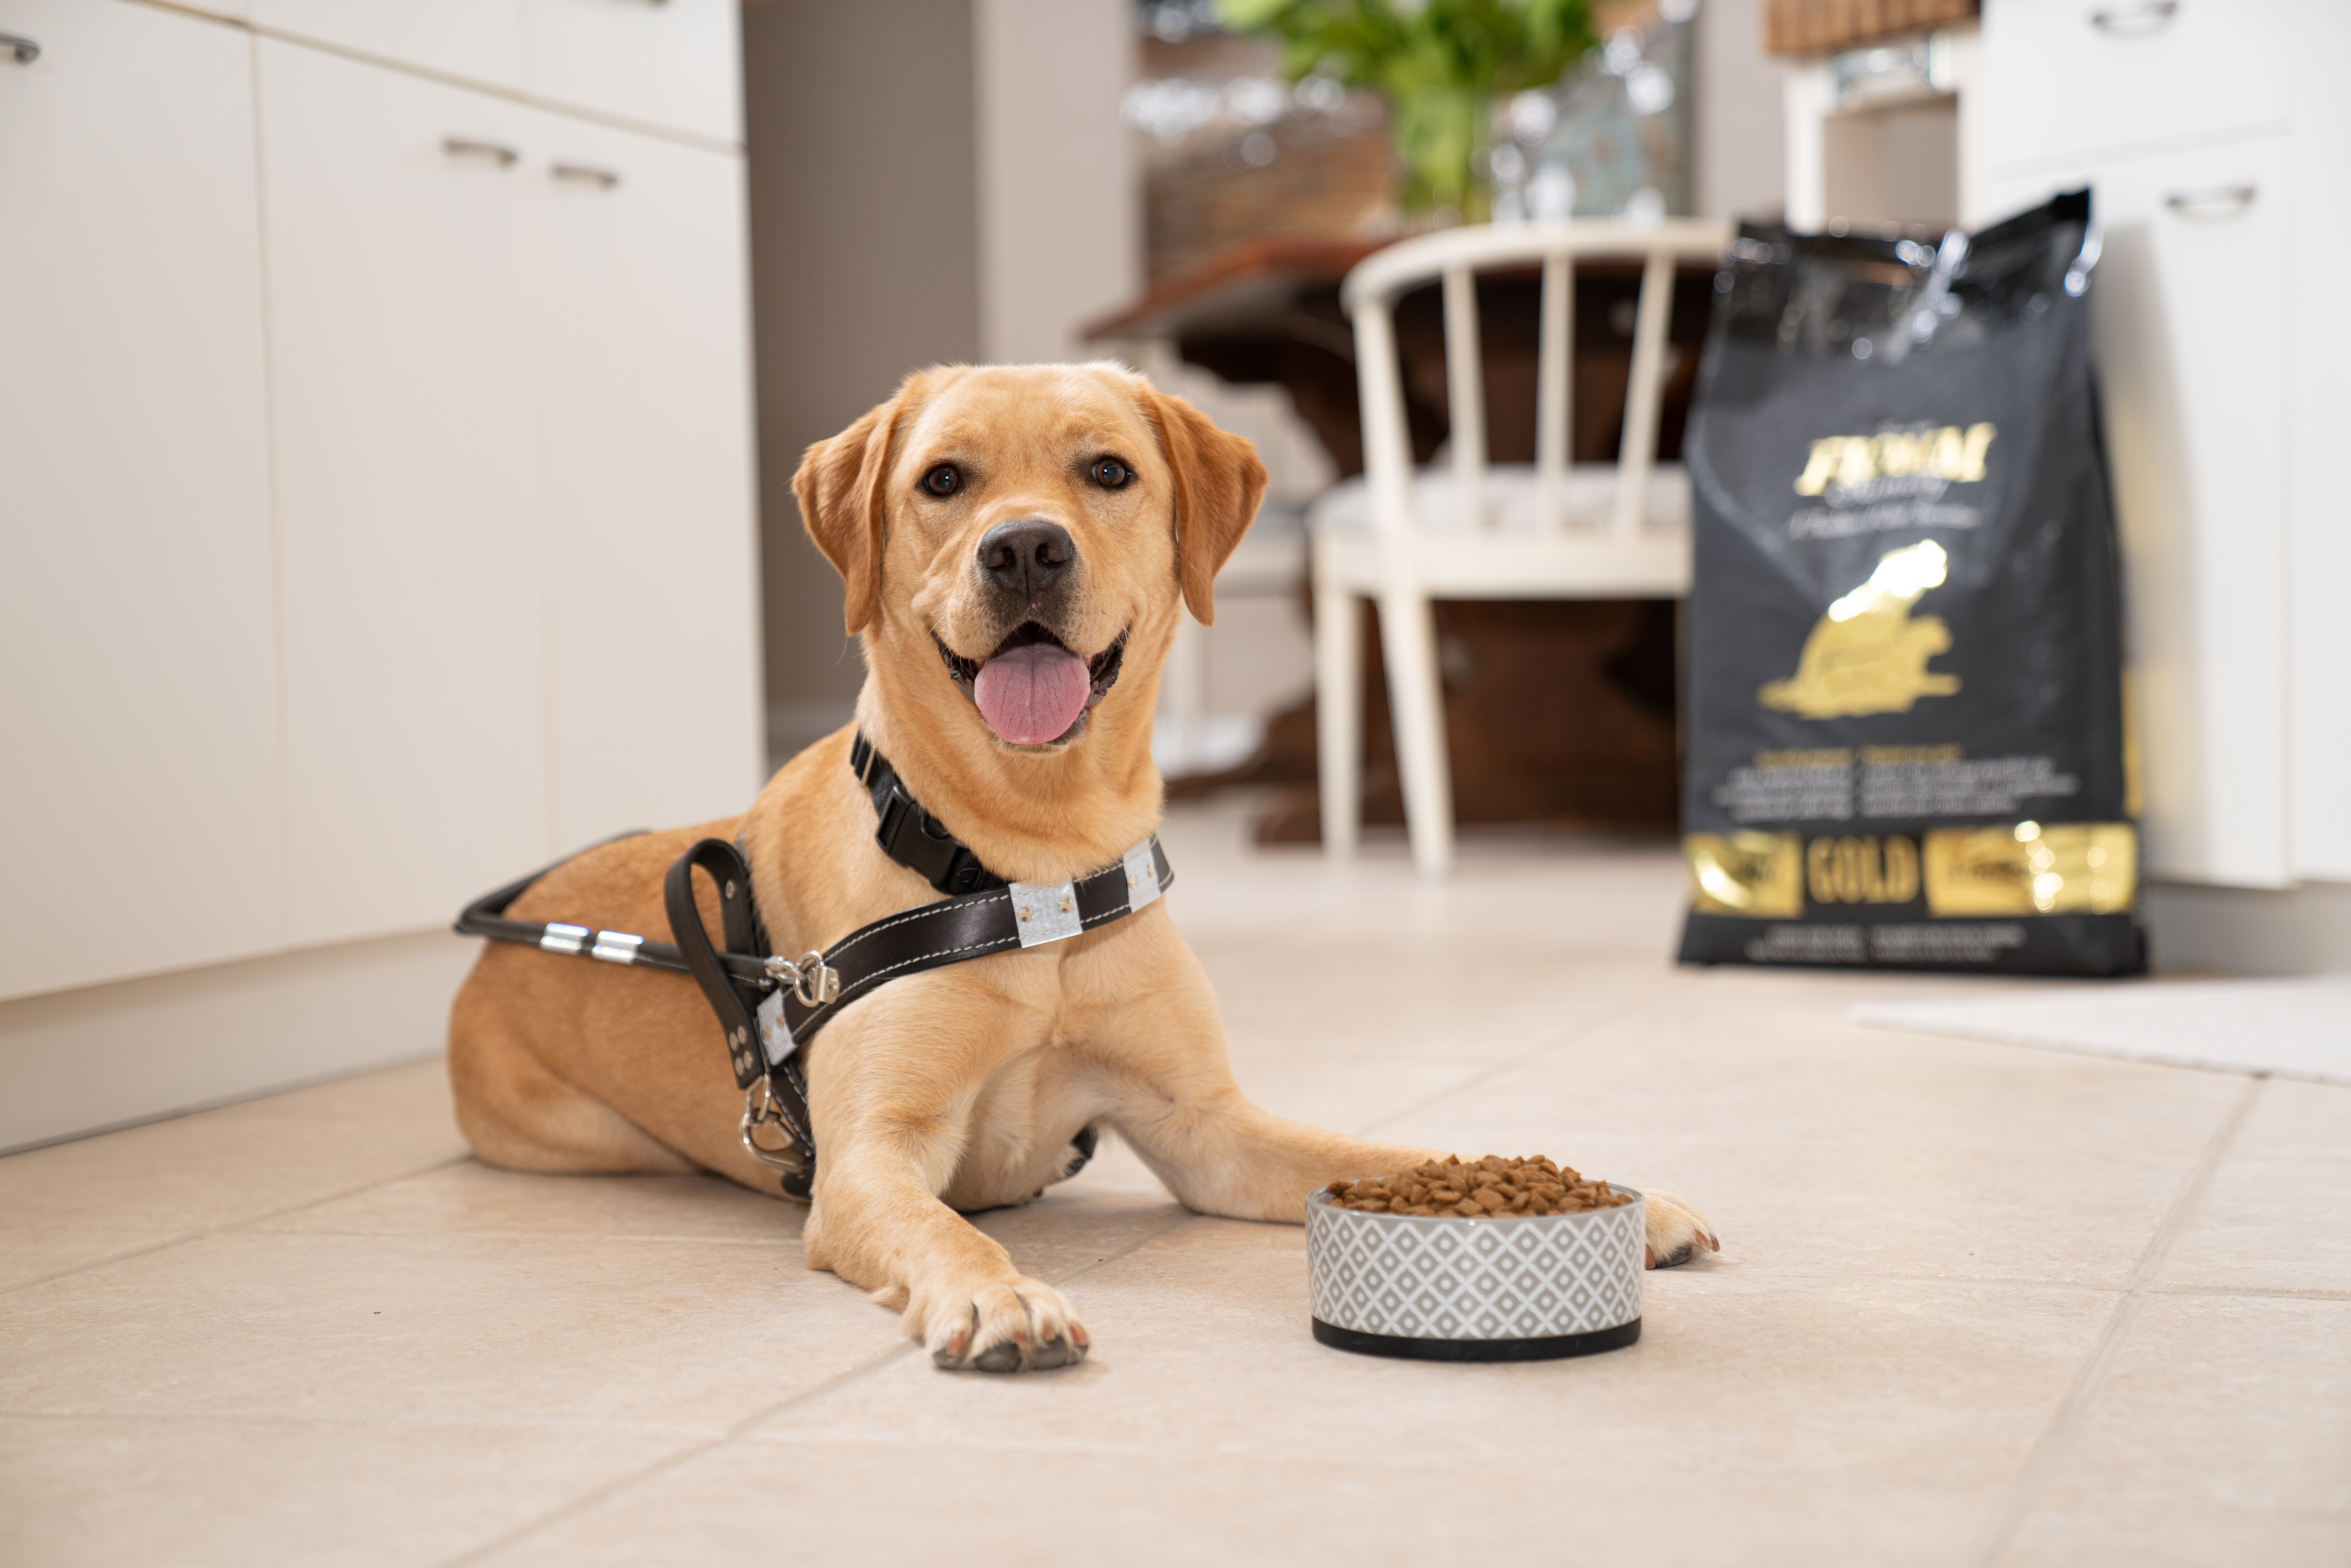 A yellow Labrador lays in front of a bowl of Fromm dog food.